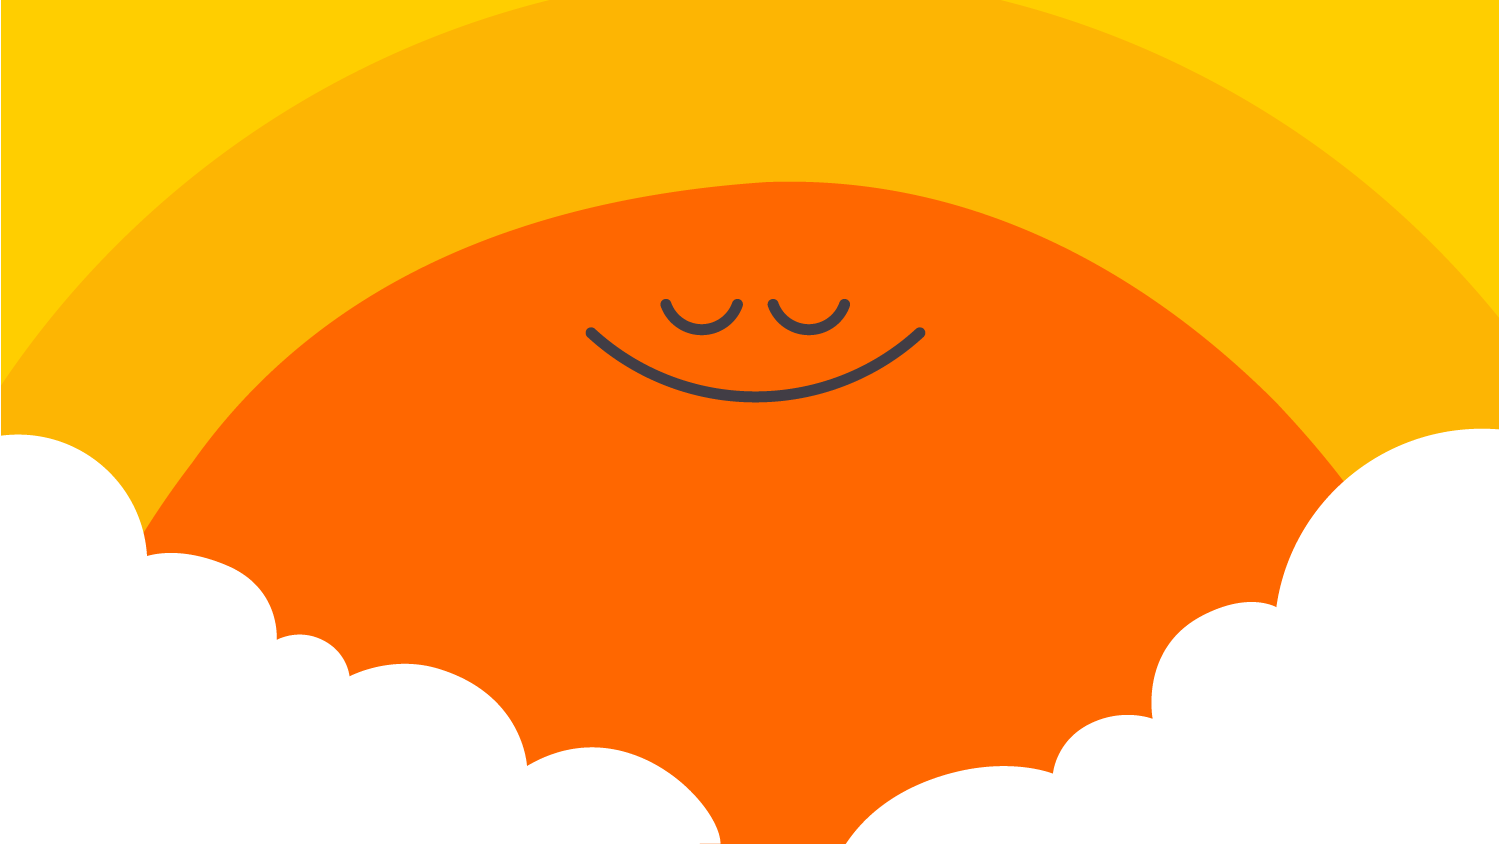 The headspace logo sits in a cloud with tints of yellow backgrounds.